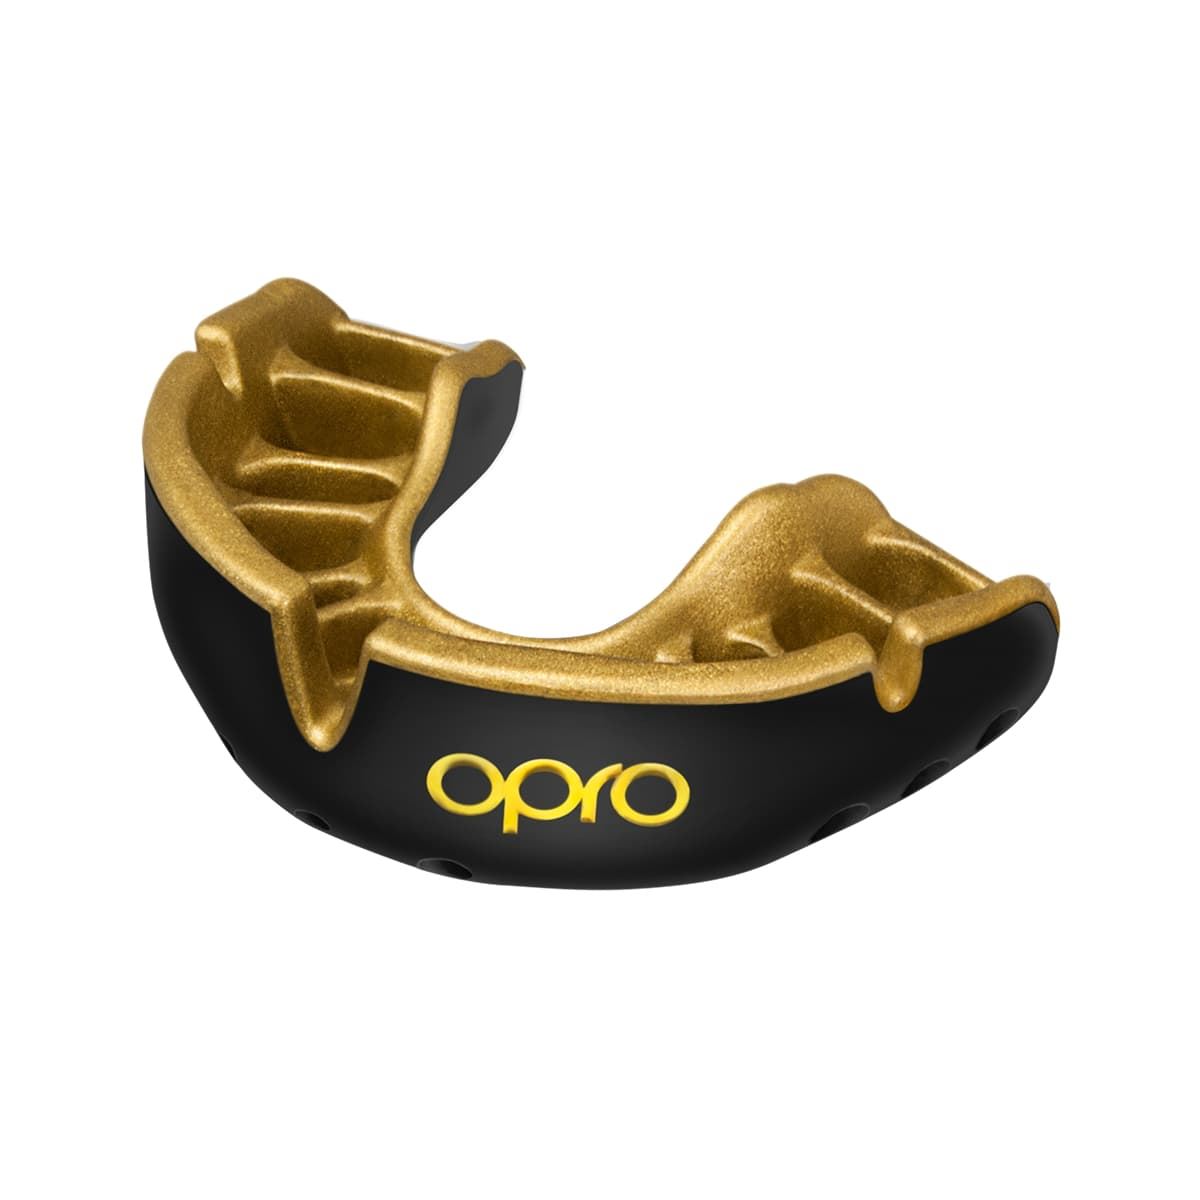 Men's Rugby Protective Mouthguard OPRO Self-Fit Gold 2022 Black/Gold